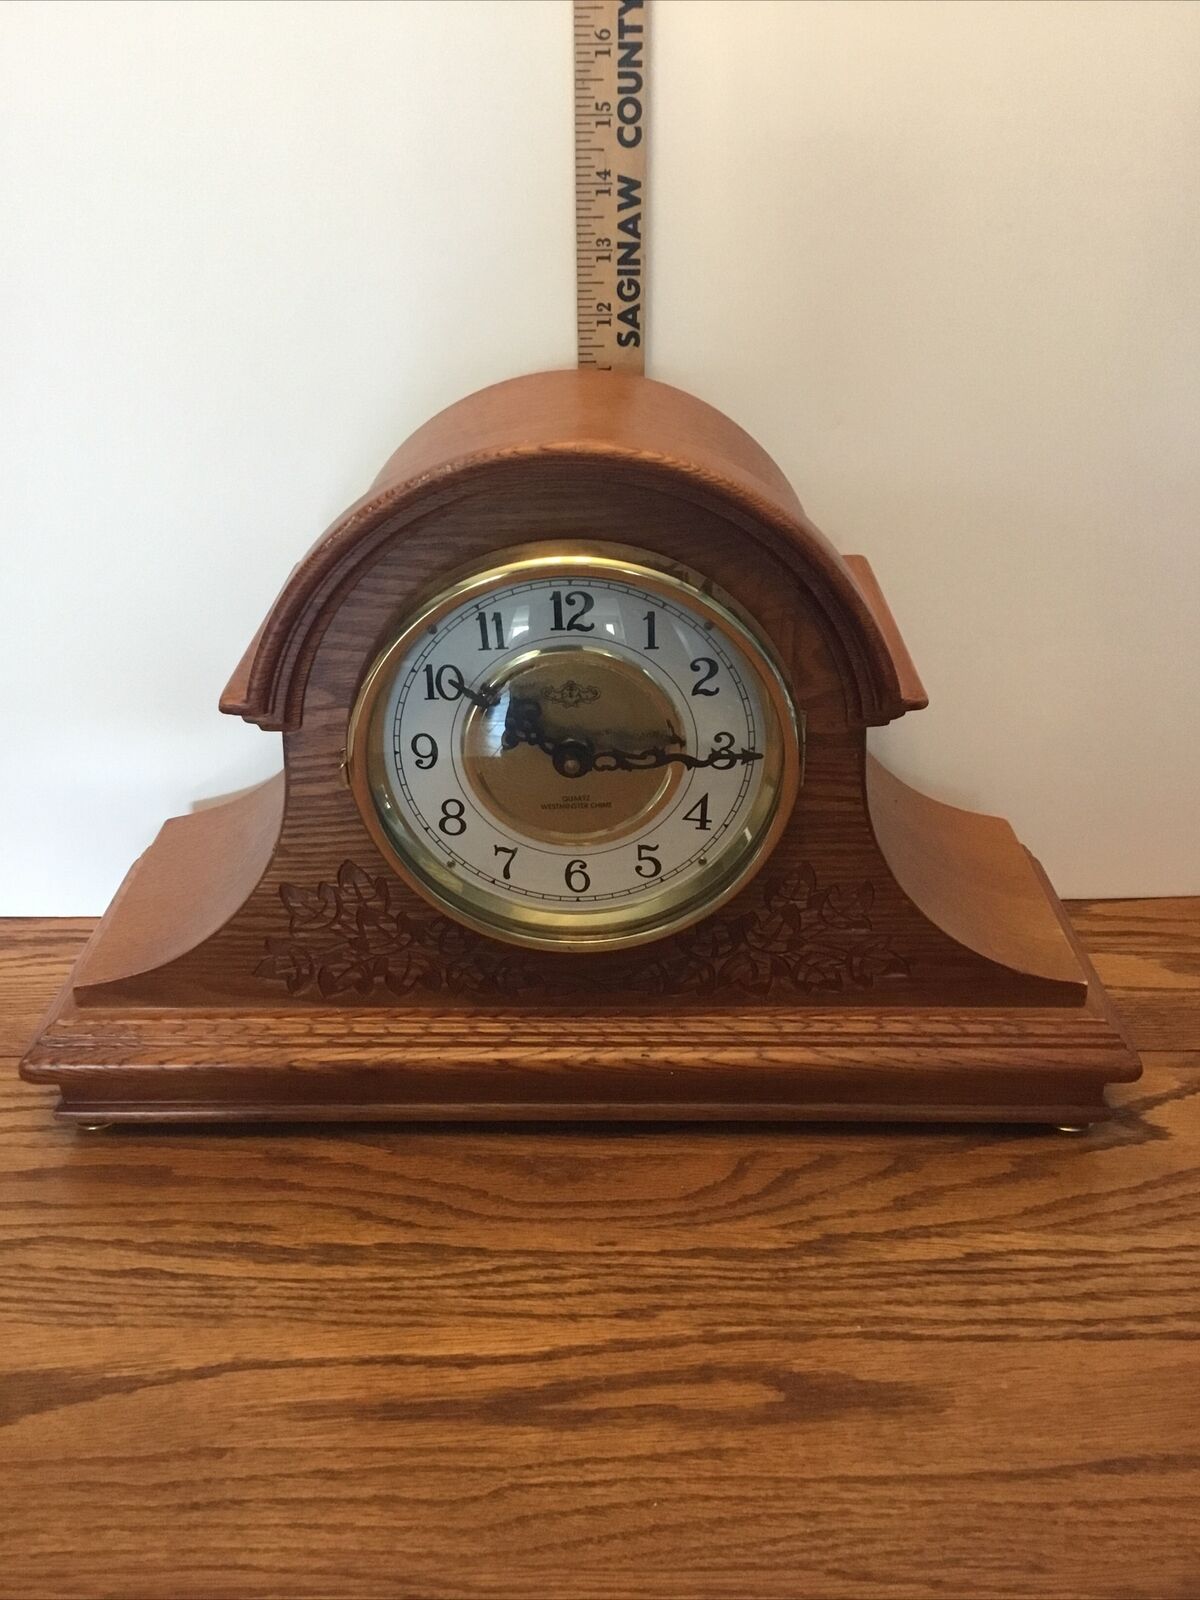 D&A Quartz Westminster Chime Mantel Clock Tested Working 